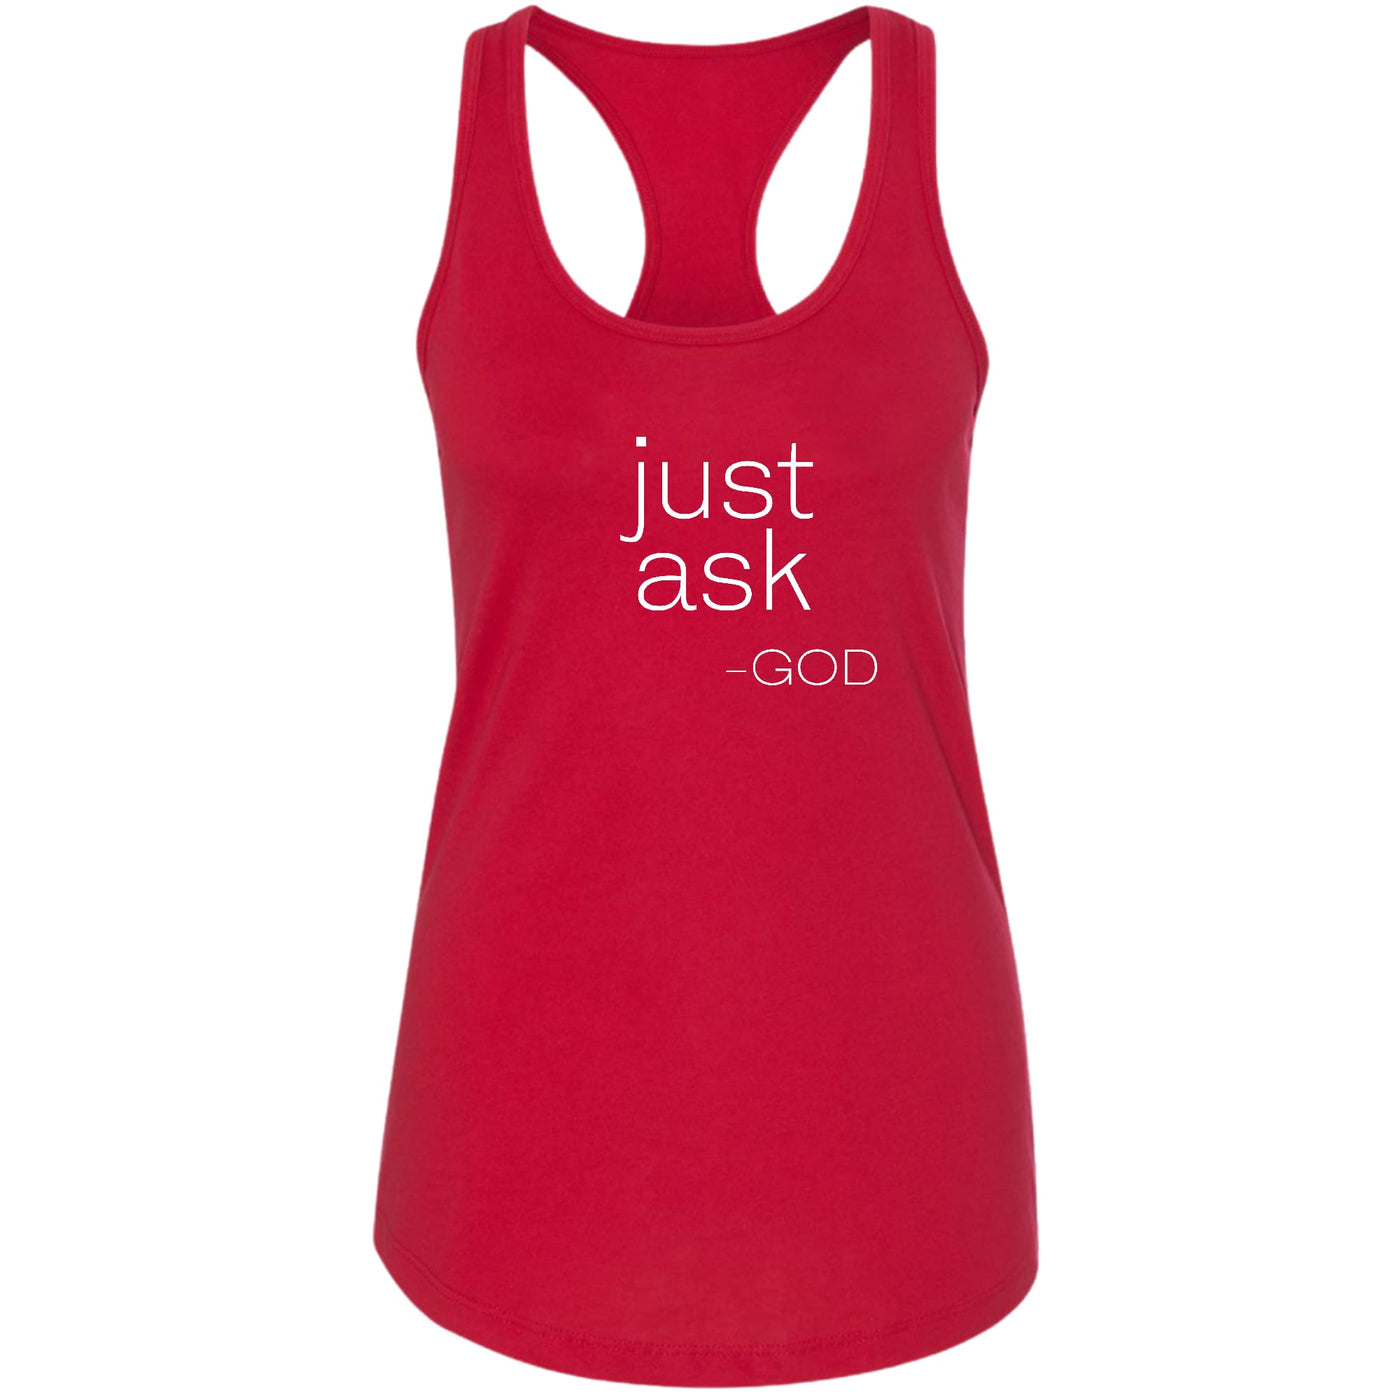 Womens Tank Top Fitness T-shirt Say It Soul ’just Ask-god’ Statement